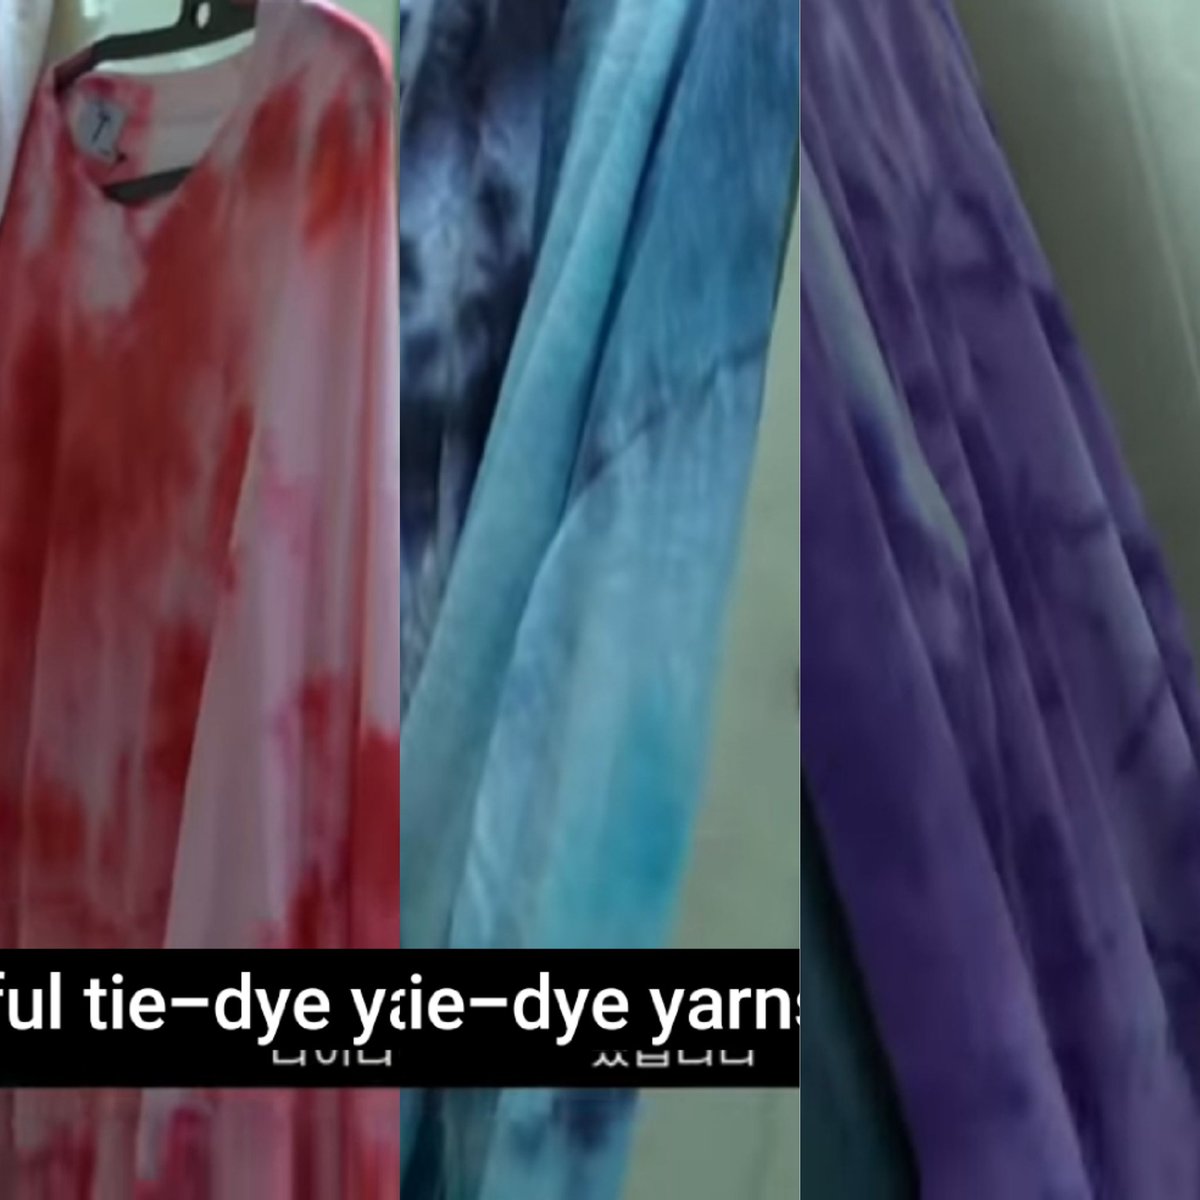 oec x ateez pt.3by. hongjoong's black & white cover also has oec's color as one of the backgrounds and on the behind the scenes, only red, blue, purple colors have each tie dye shirts 